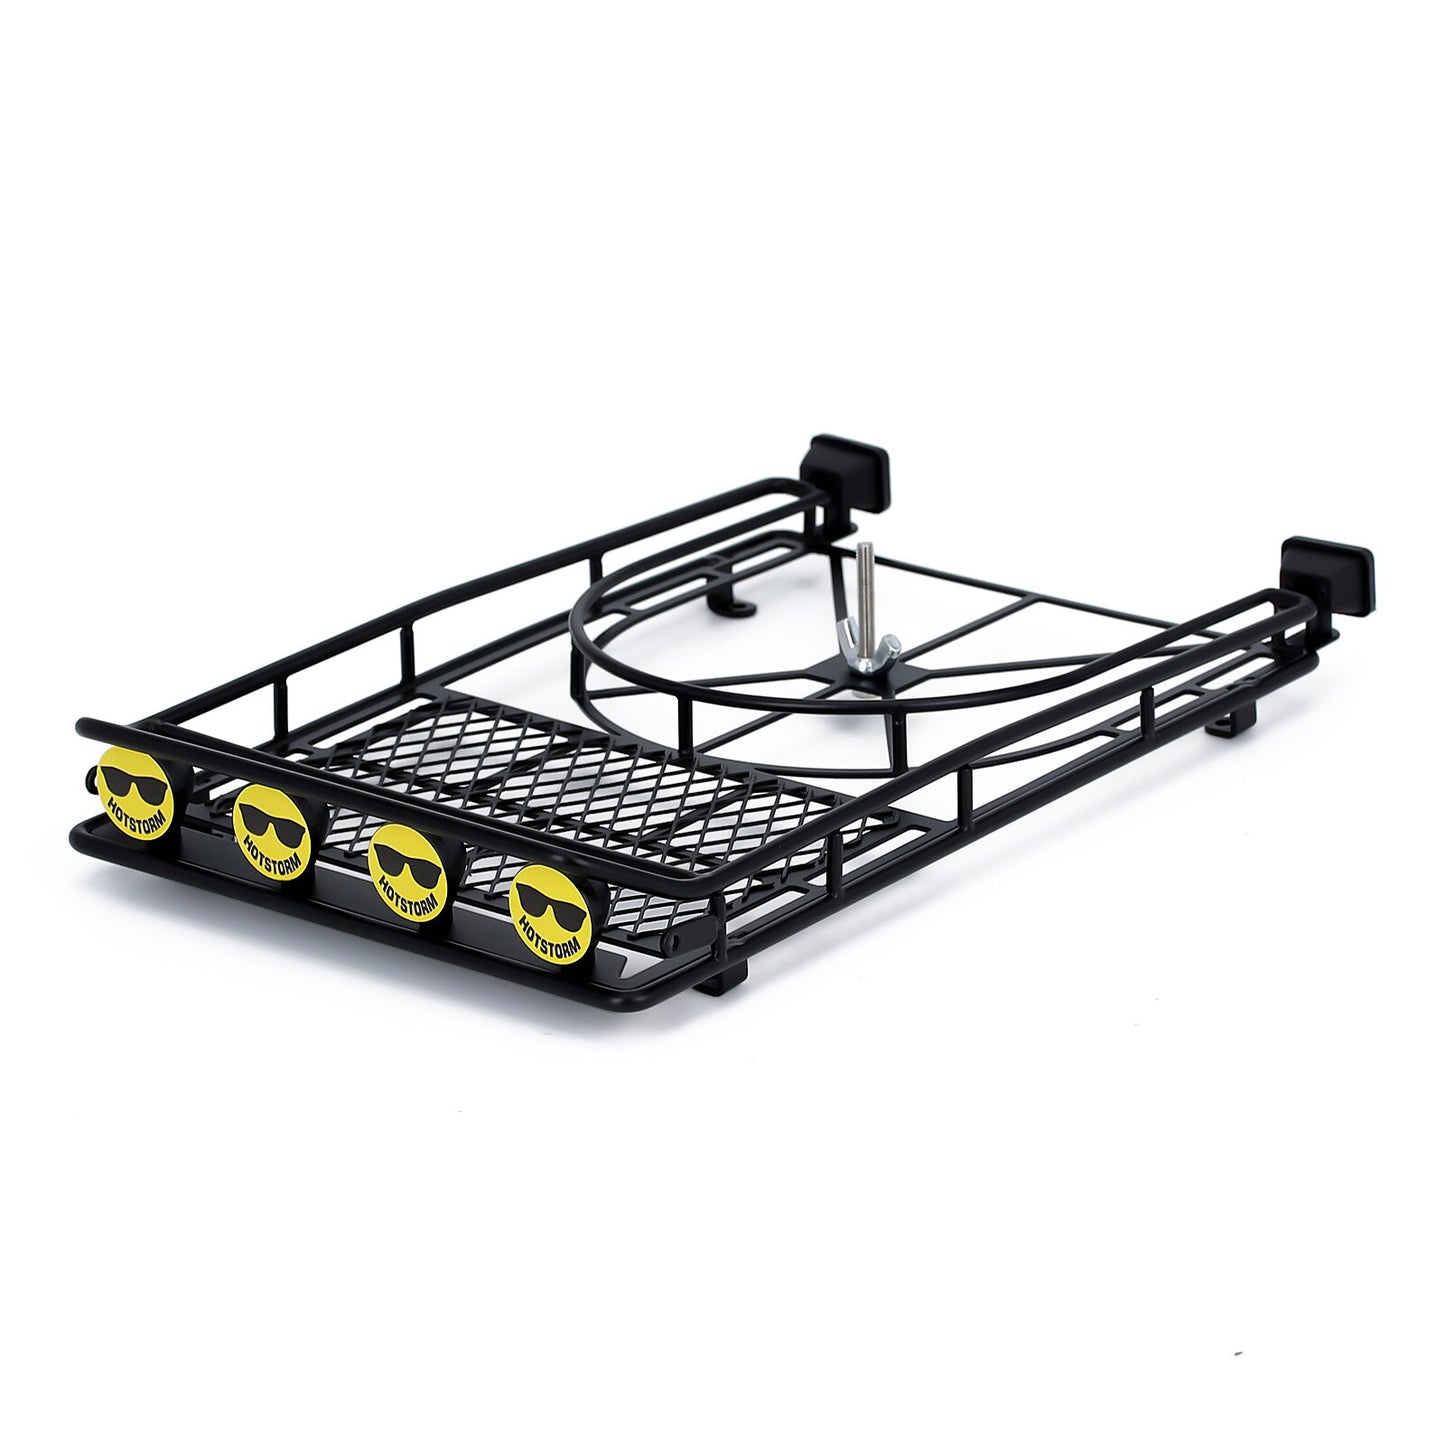 INJORA Metal Roof Rack Luggage Carrier with LED Light for 1/10 RC Crawler D90 Axial SCX10 SCX10 II 90046